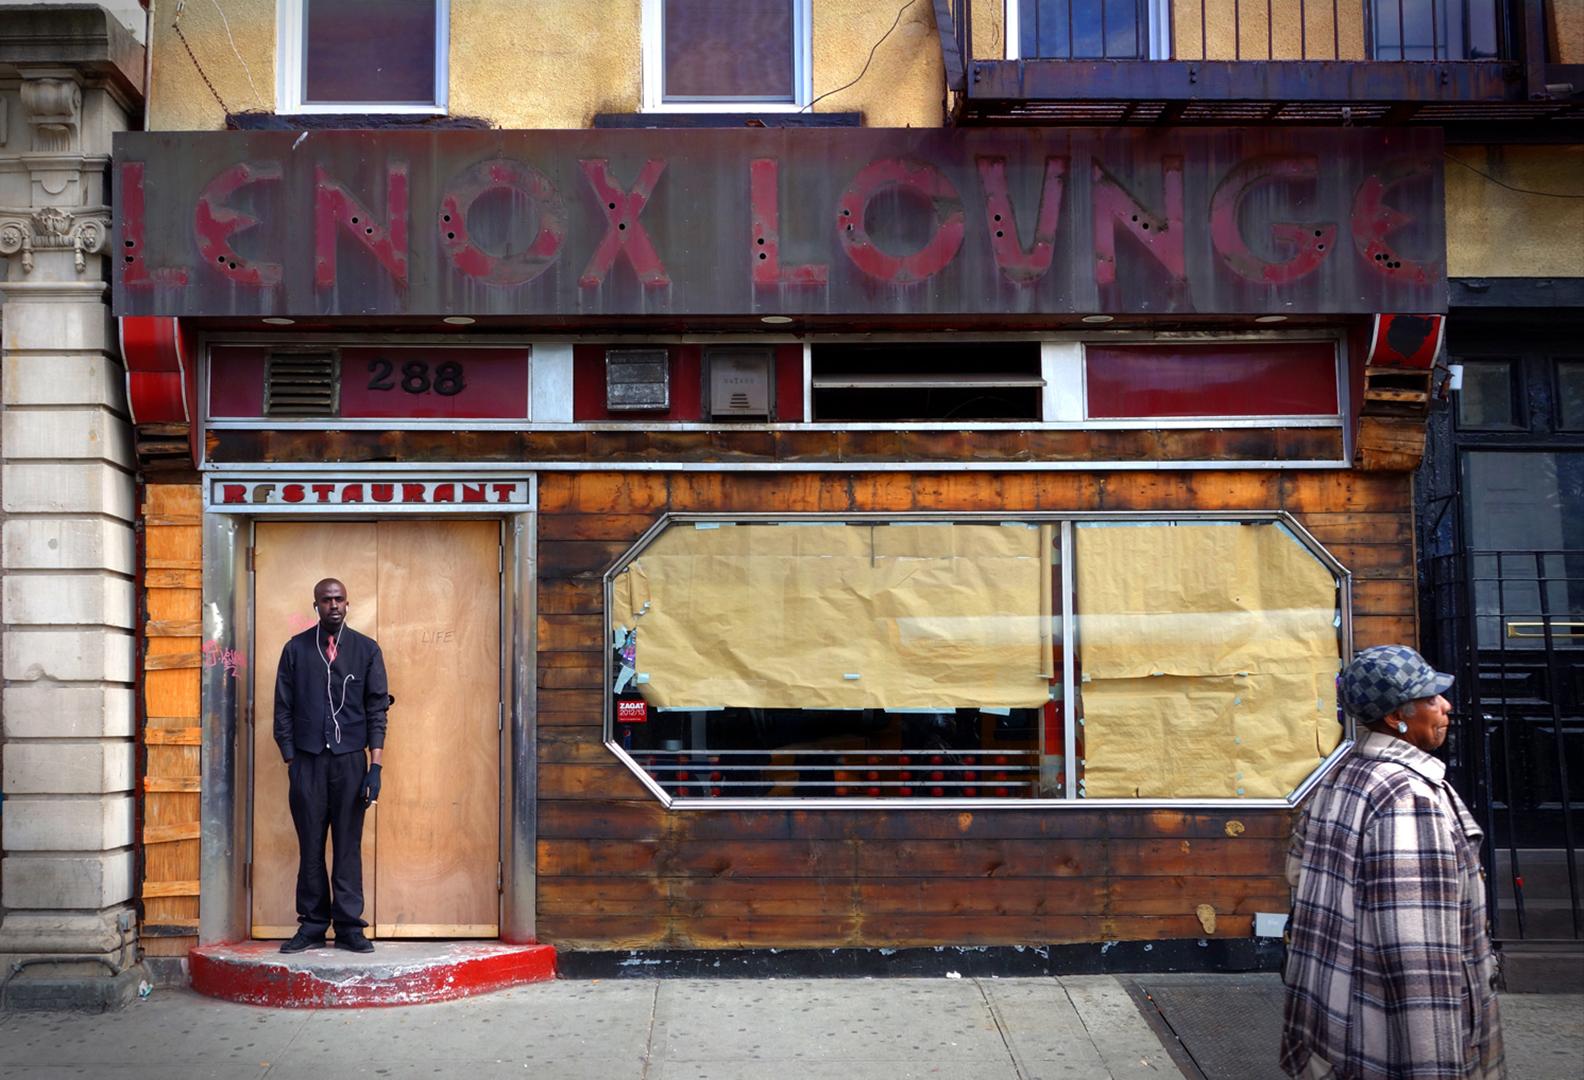 Artist: Sally Davies (1956)
Title: Lenox Lounge (New York City)
Year: 2022
Medium: Inkjet print on archival paper
Edition: 24, plus proofs
Size: 17 x 22 inches
Condition: Excellent
Inscription: Signed, dated, titled by the artist
Notes: This